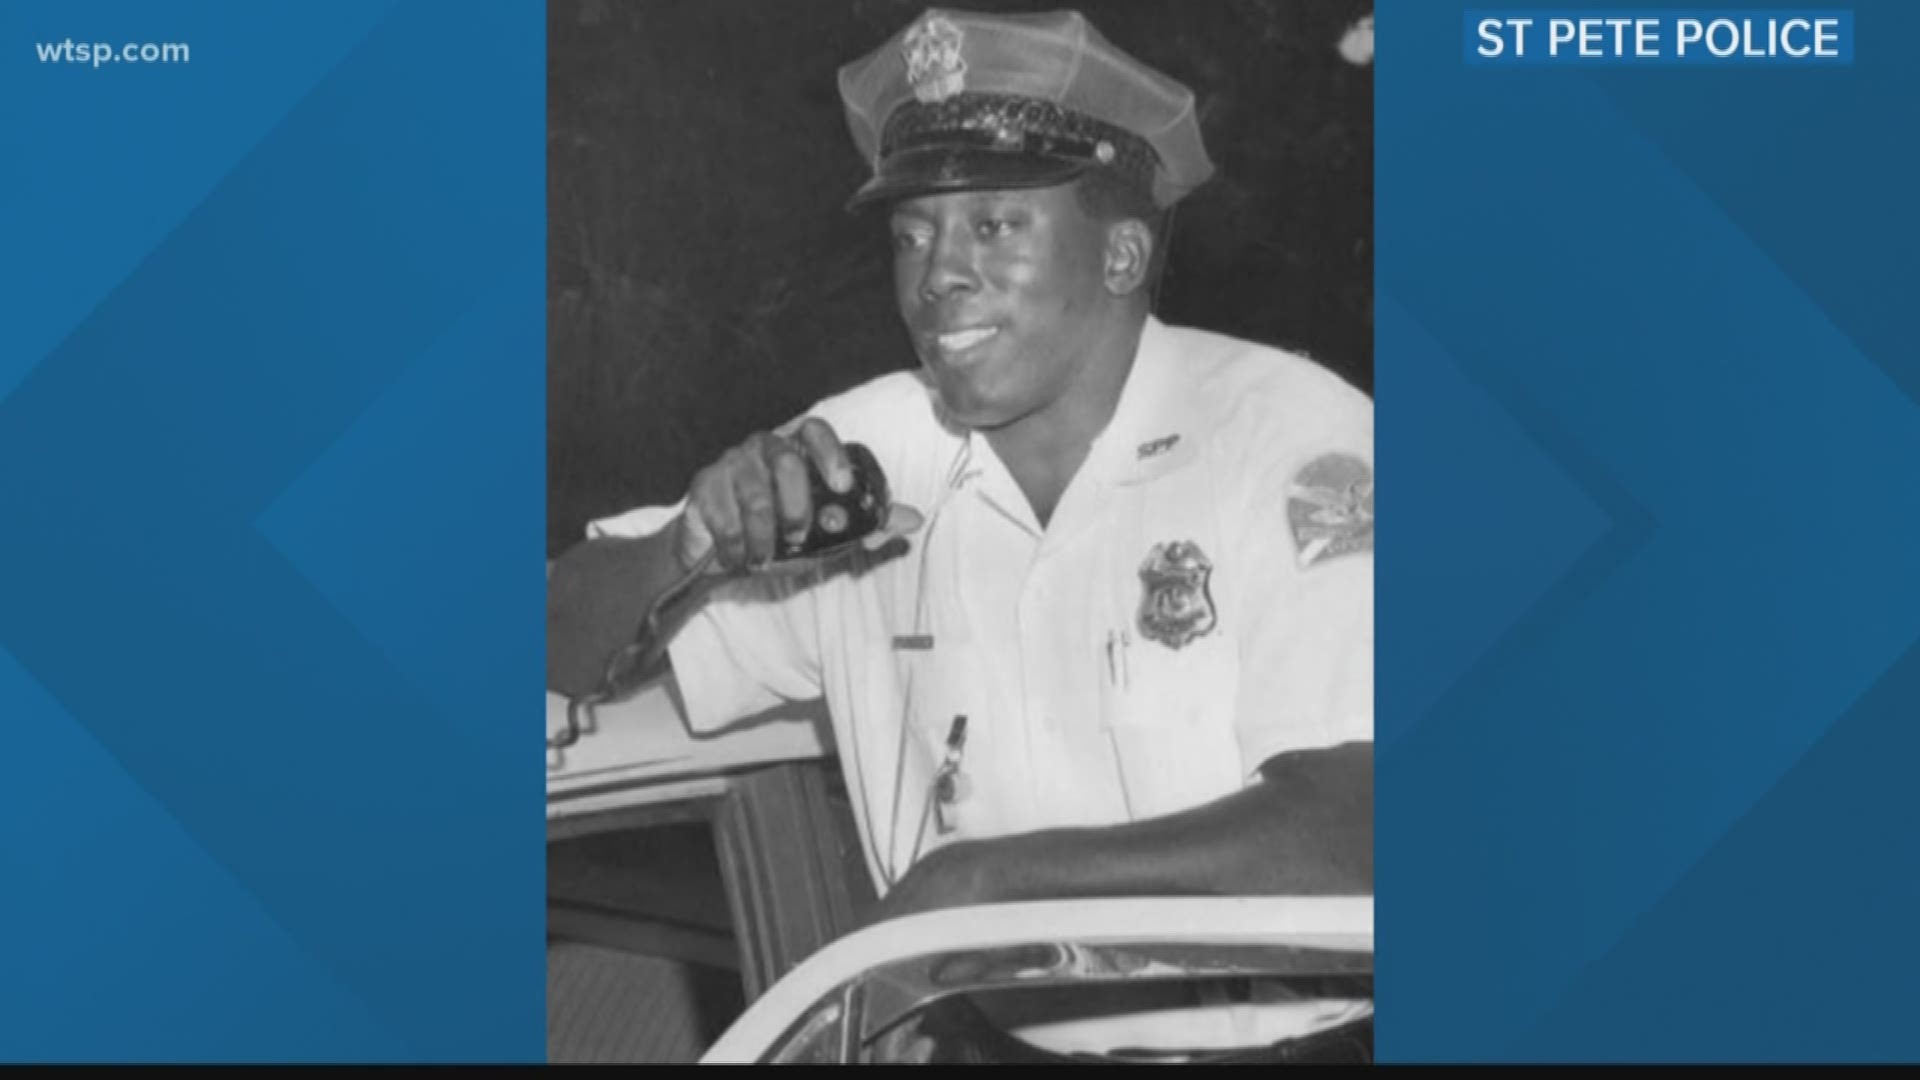 A former Florida police officer who helped lead the charge for black officers to have the same job opportunities as their white colleagues died Friday.

Retired Officer Freddie L. Crawford died with his children by his side, according to the St. Petersburg Police Department. He was 81 years old.

The department said Crawford was among a group of 12 black officers, known as the "Courageous 12," who filed a lawsuit in federal court against the city in May 1965. Retired Officer Leon Jackson, the last remaining survivor of the group, said it was Crawford's idea to sue.